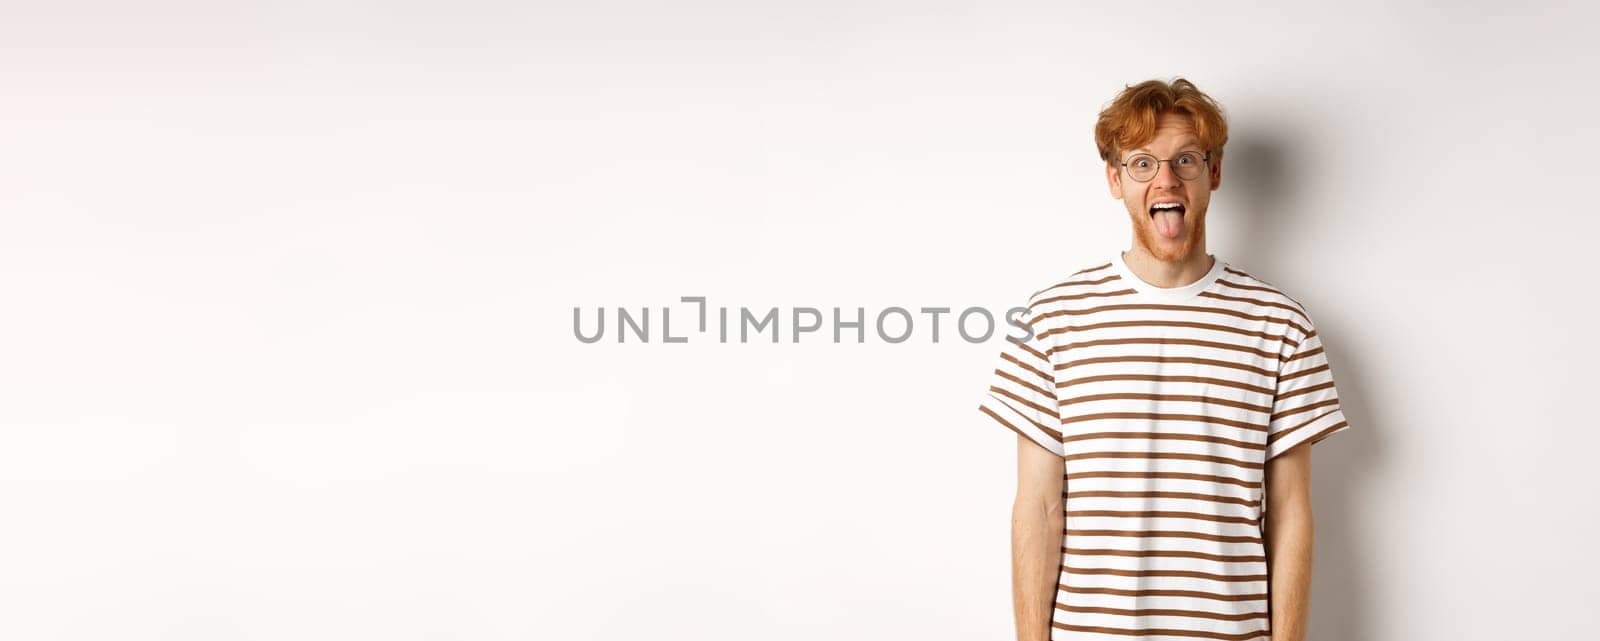 Funny young man with messy red hair and glasses showing tongue, staring at camera, standing over white background.